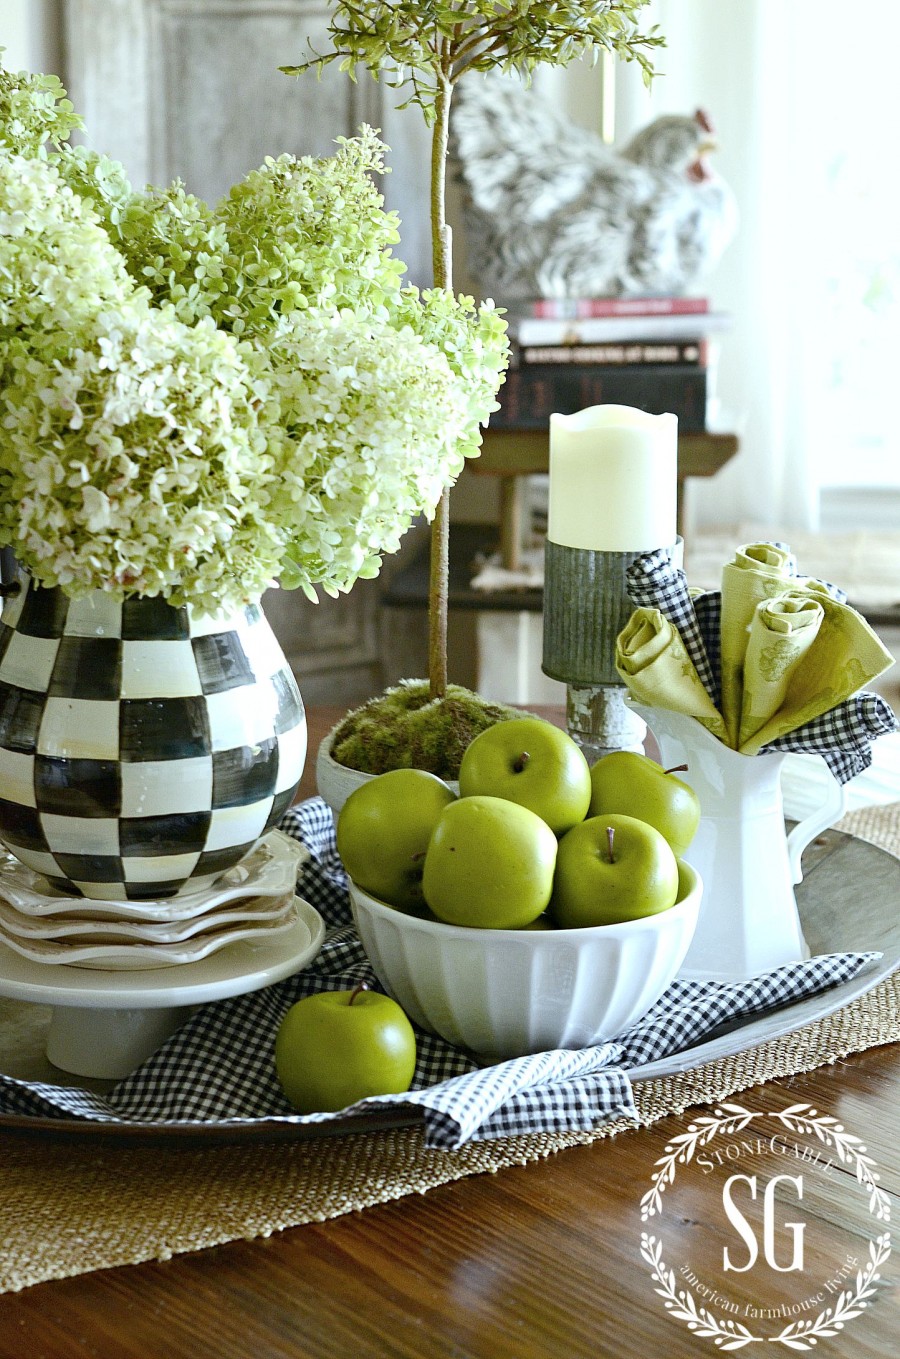 EARLY FALL AND GREEN APPLES- The perfect kitchen table display for early fall. So simple to make-stonegableblog.com